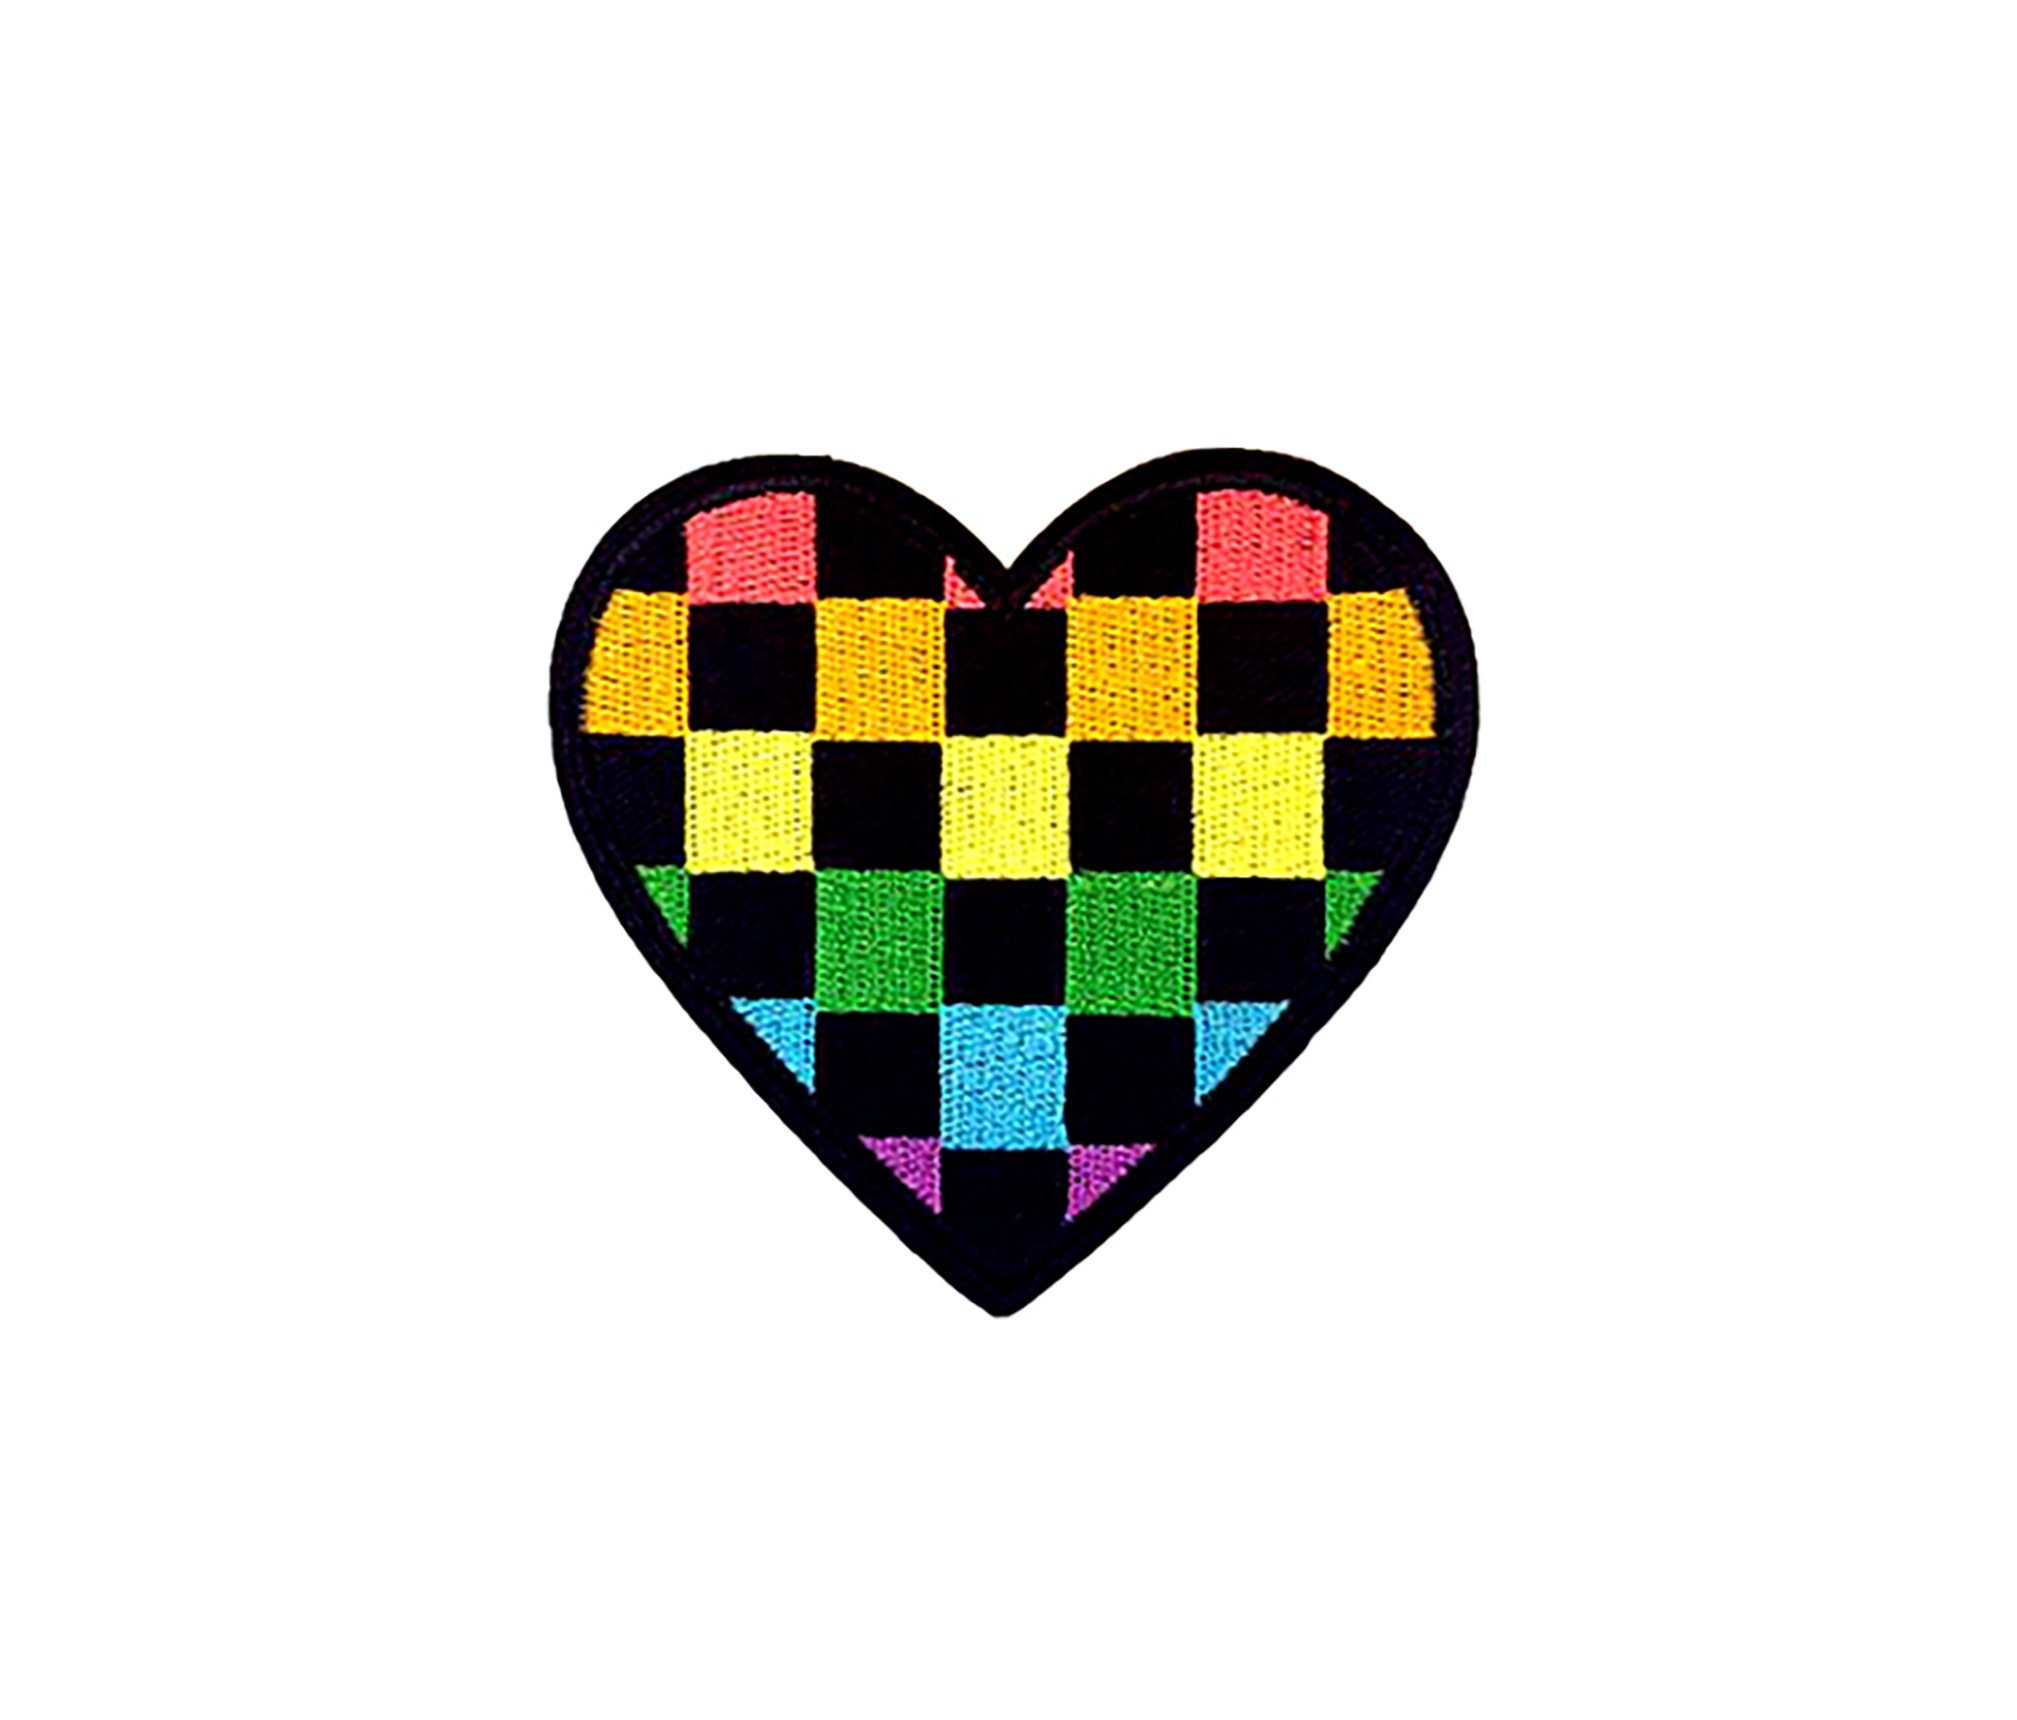 Pride Heart Checker Love Iron-On Applique Punk Skater Backpack Lapel Jacket Accessory Rainbow Checkered Heart Patch DIY Novelty Badge